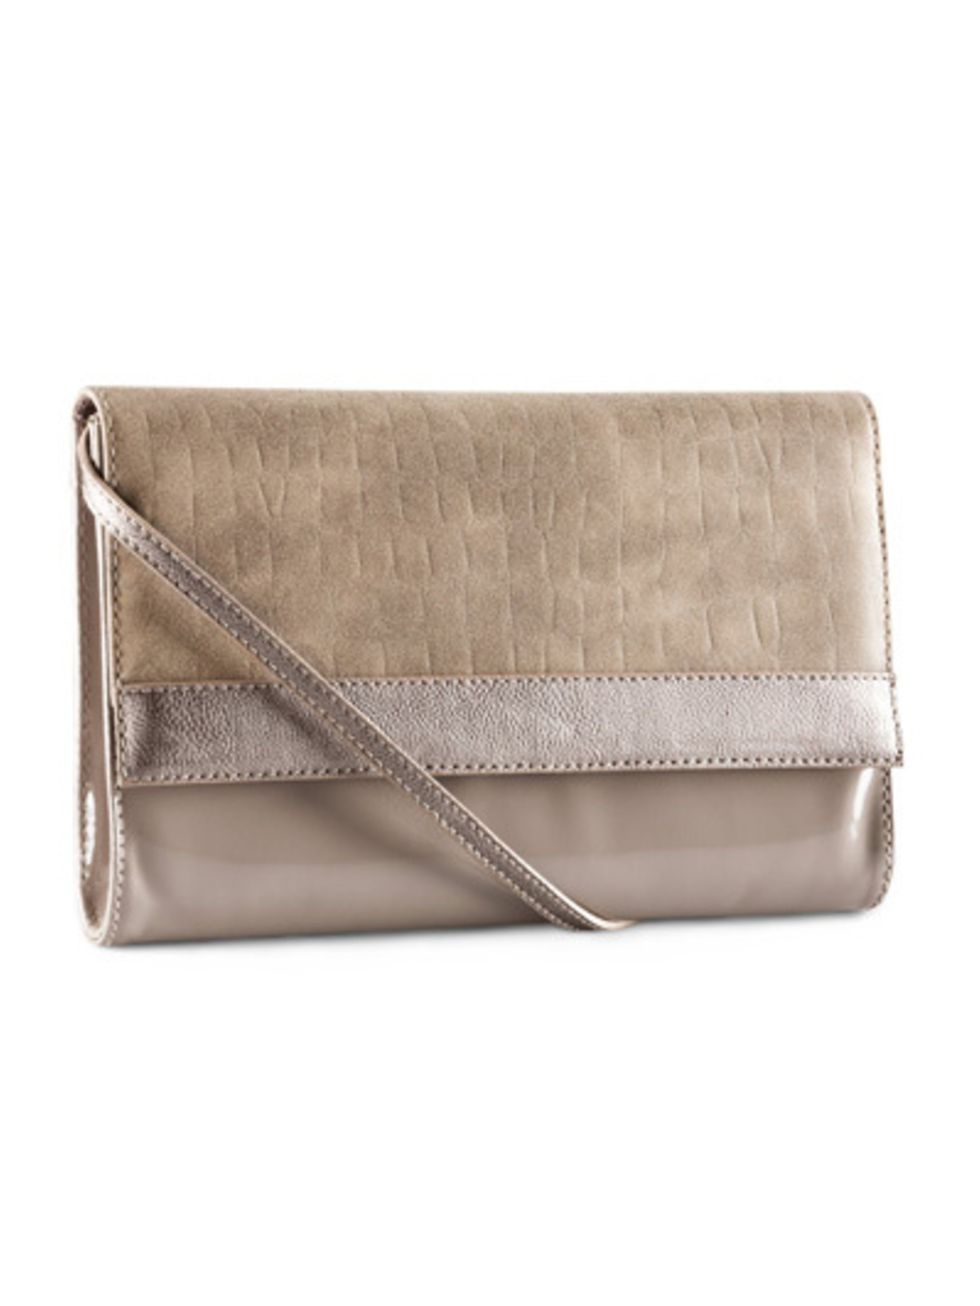 Brown, Textile, Leather, Tan, Rectangle, Beige, Wallet, 